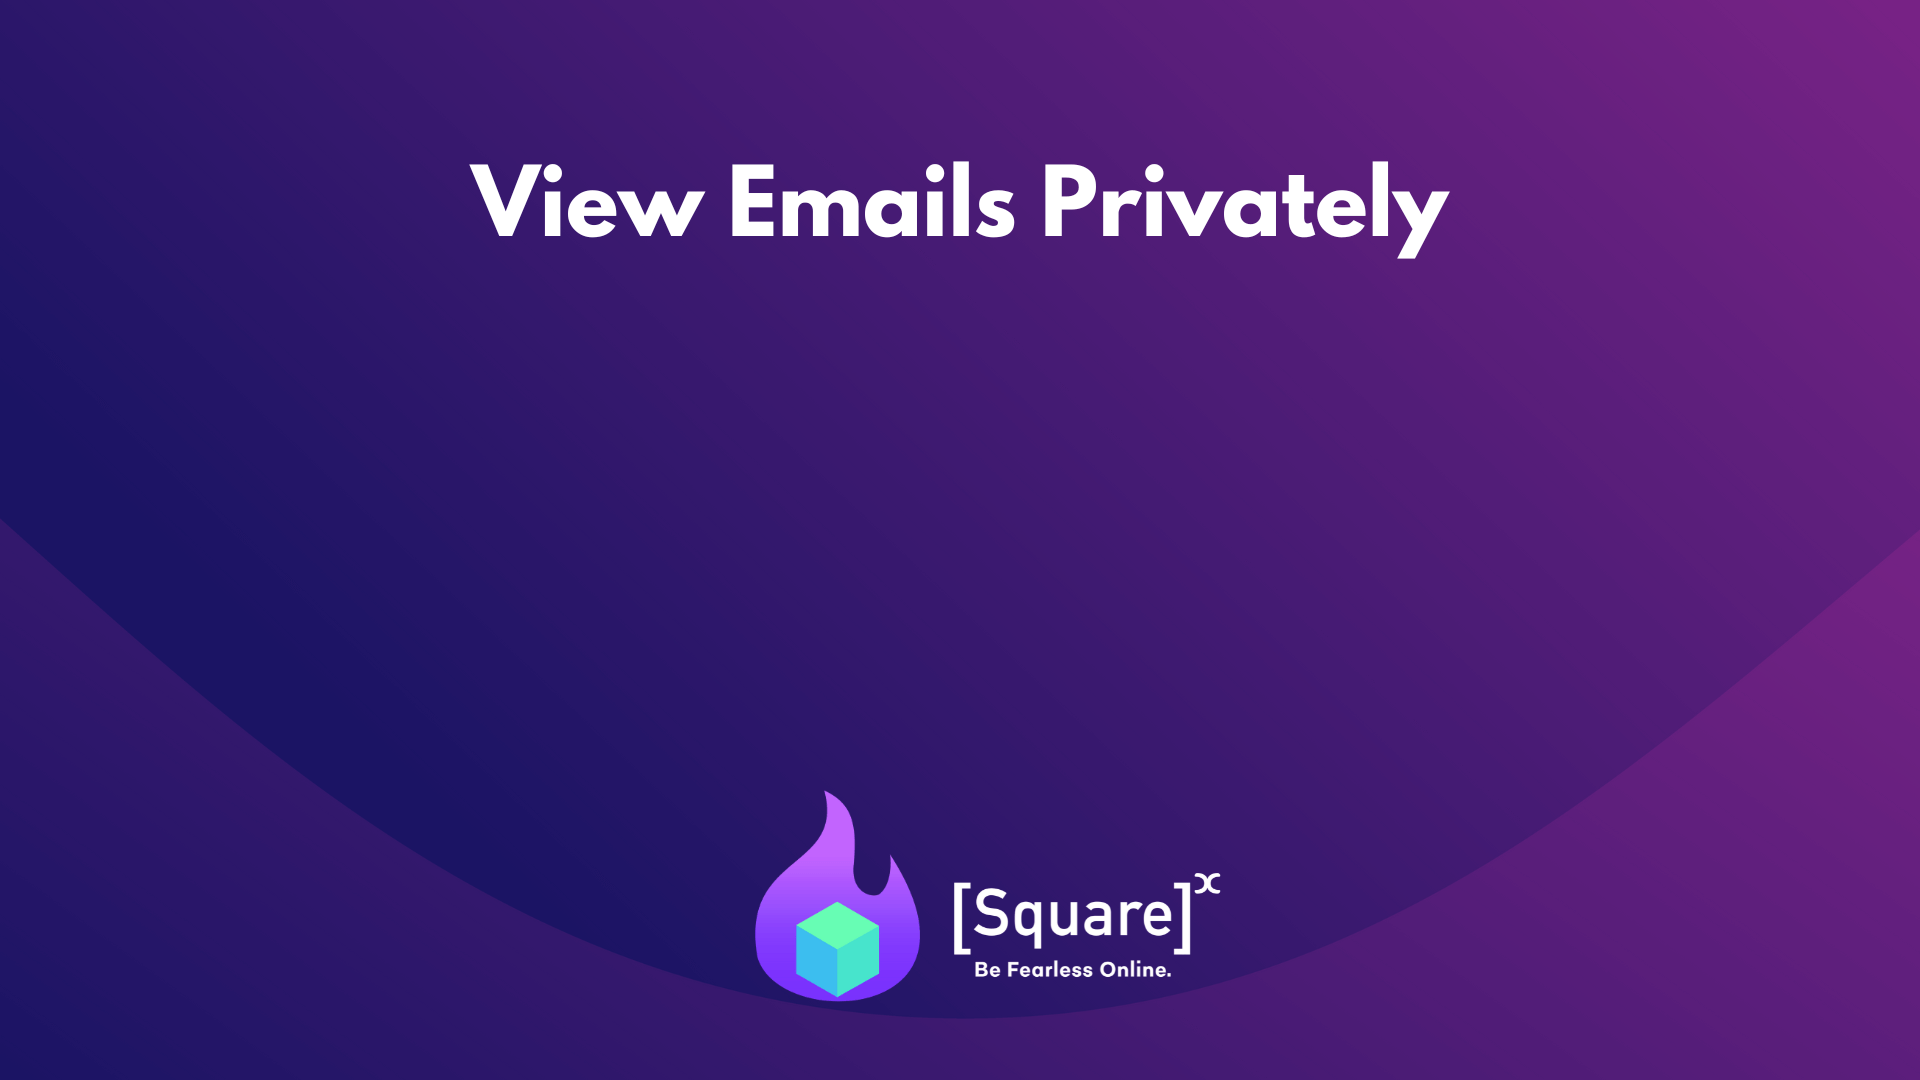 View emails privately